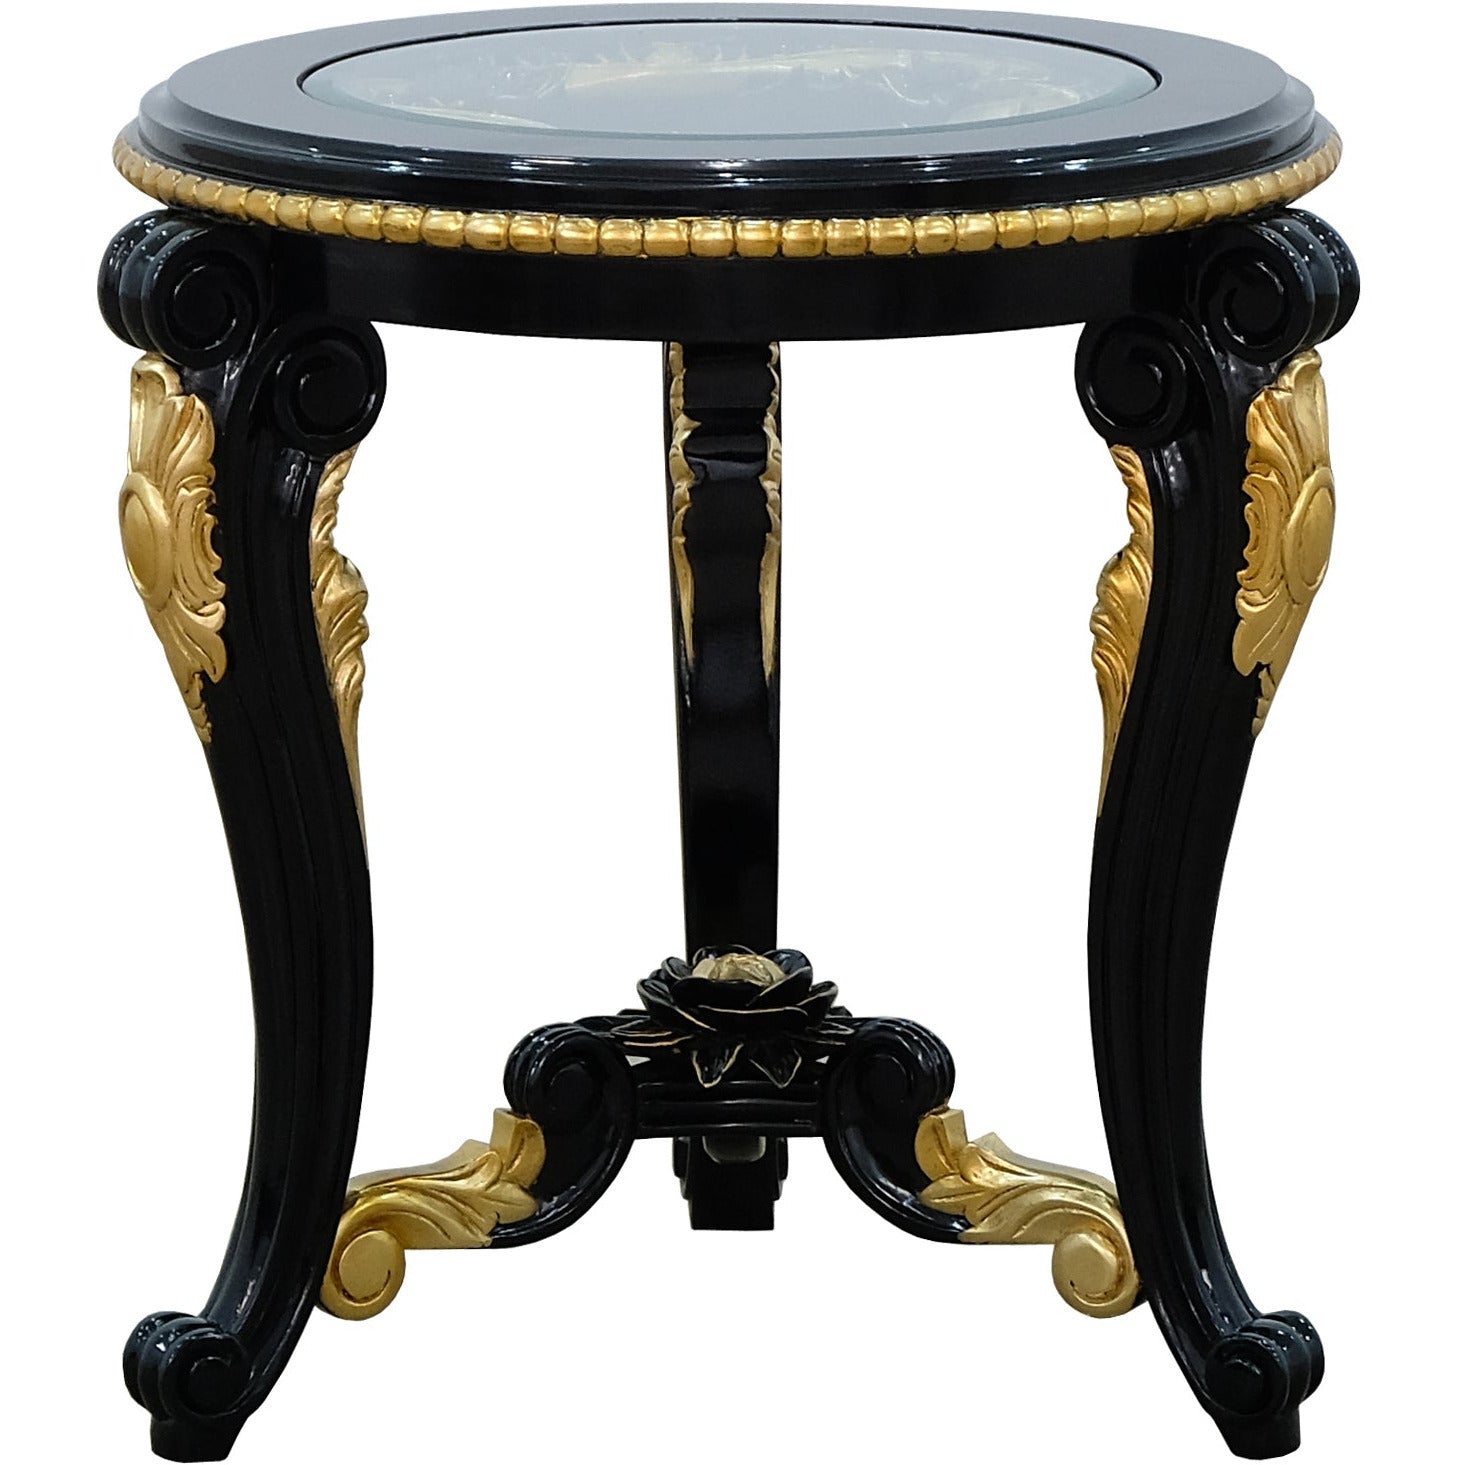 European Furniture - Bellagio III 3 Piece Occasional Table Set in Black-Gold- 30019-ET-CT - New Star Living